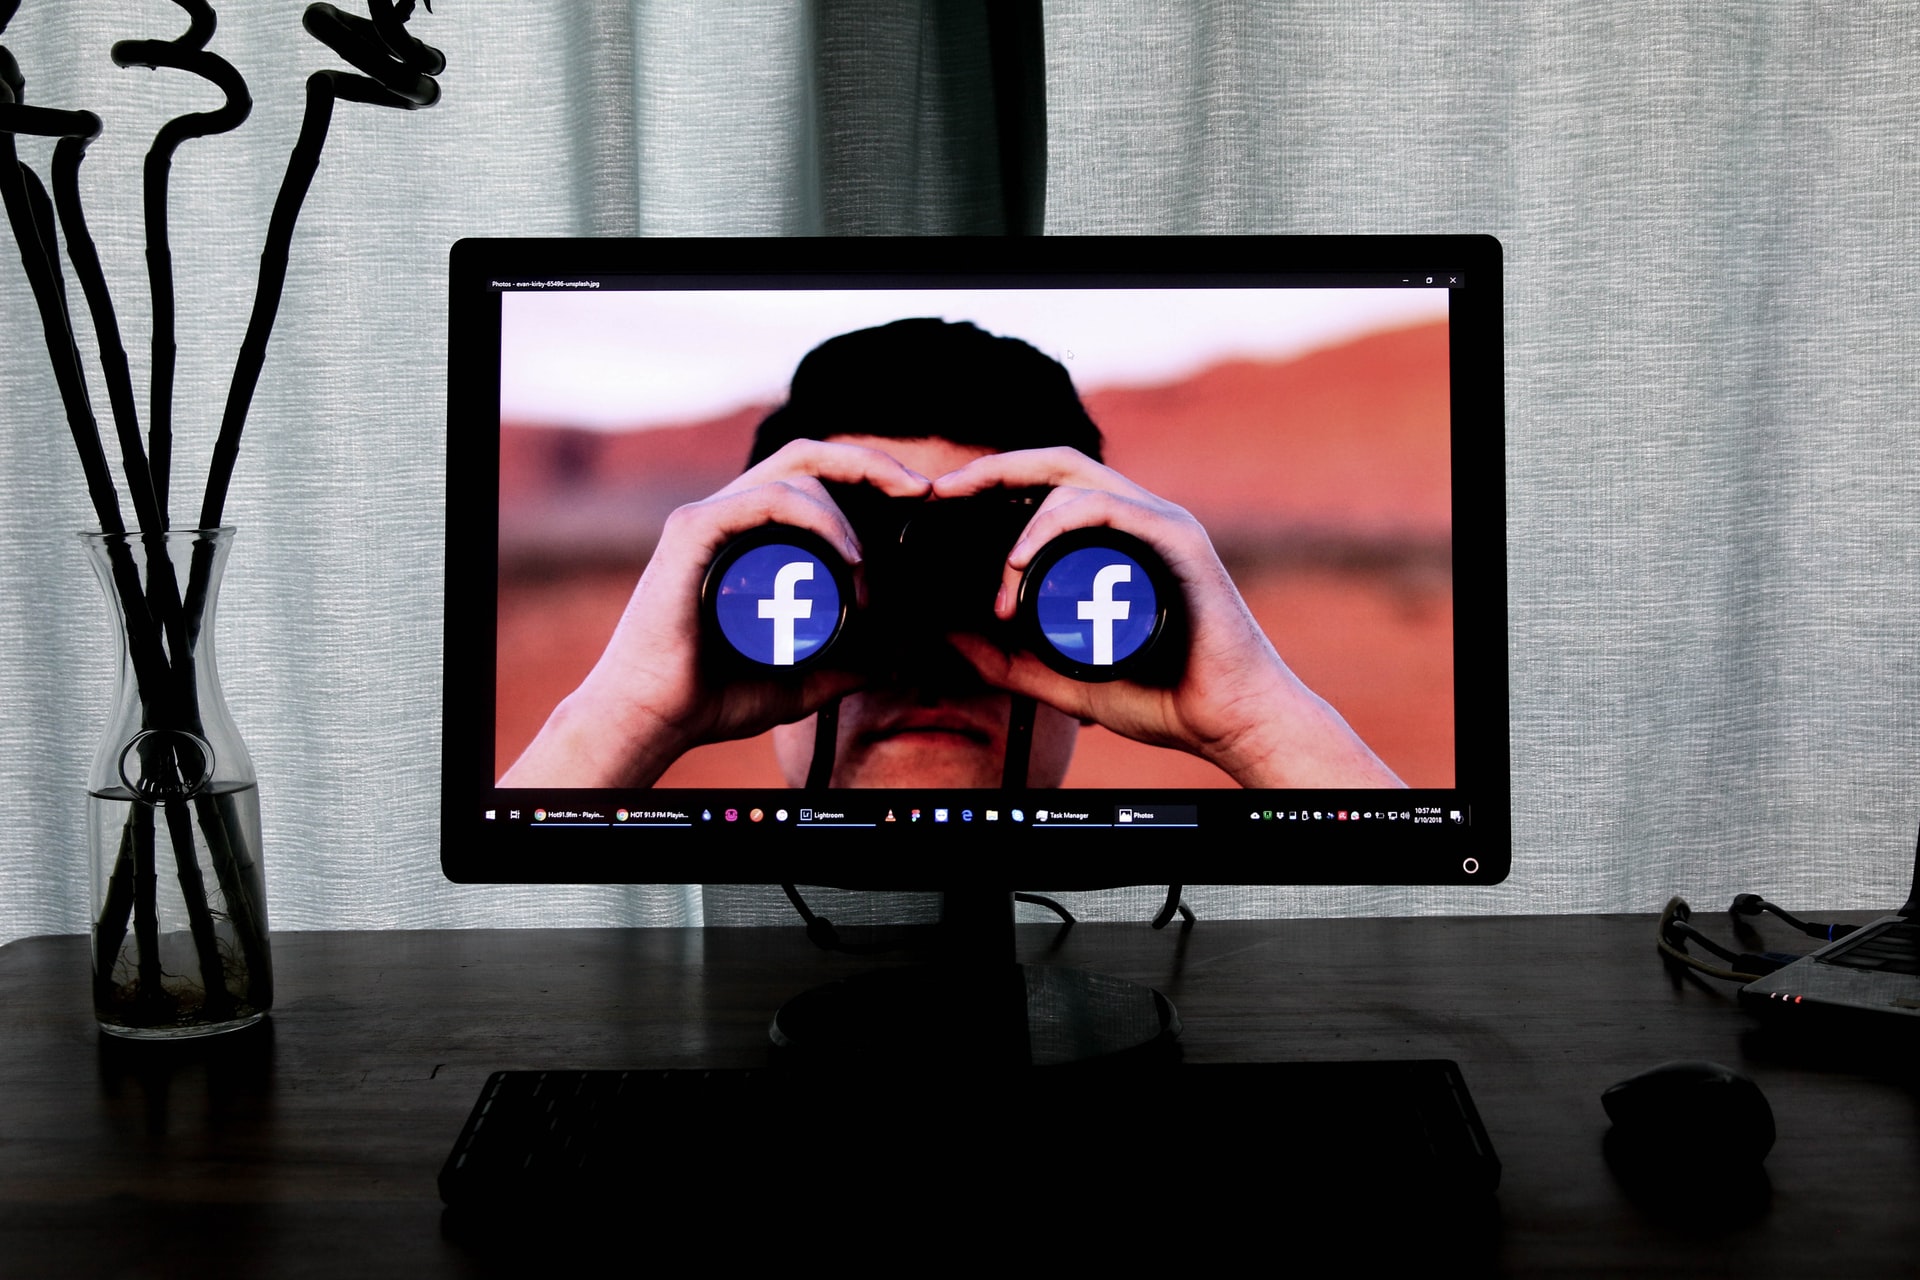 A computer screen in a dark room. The screen shows a man looking through binoculars. The binocular lens' have the facebook logo photoshopped in.